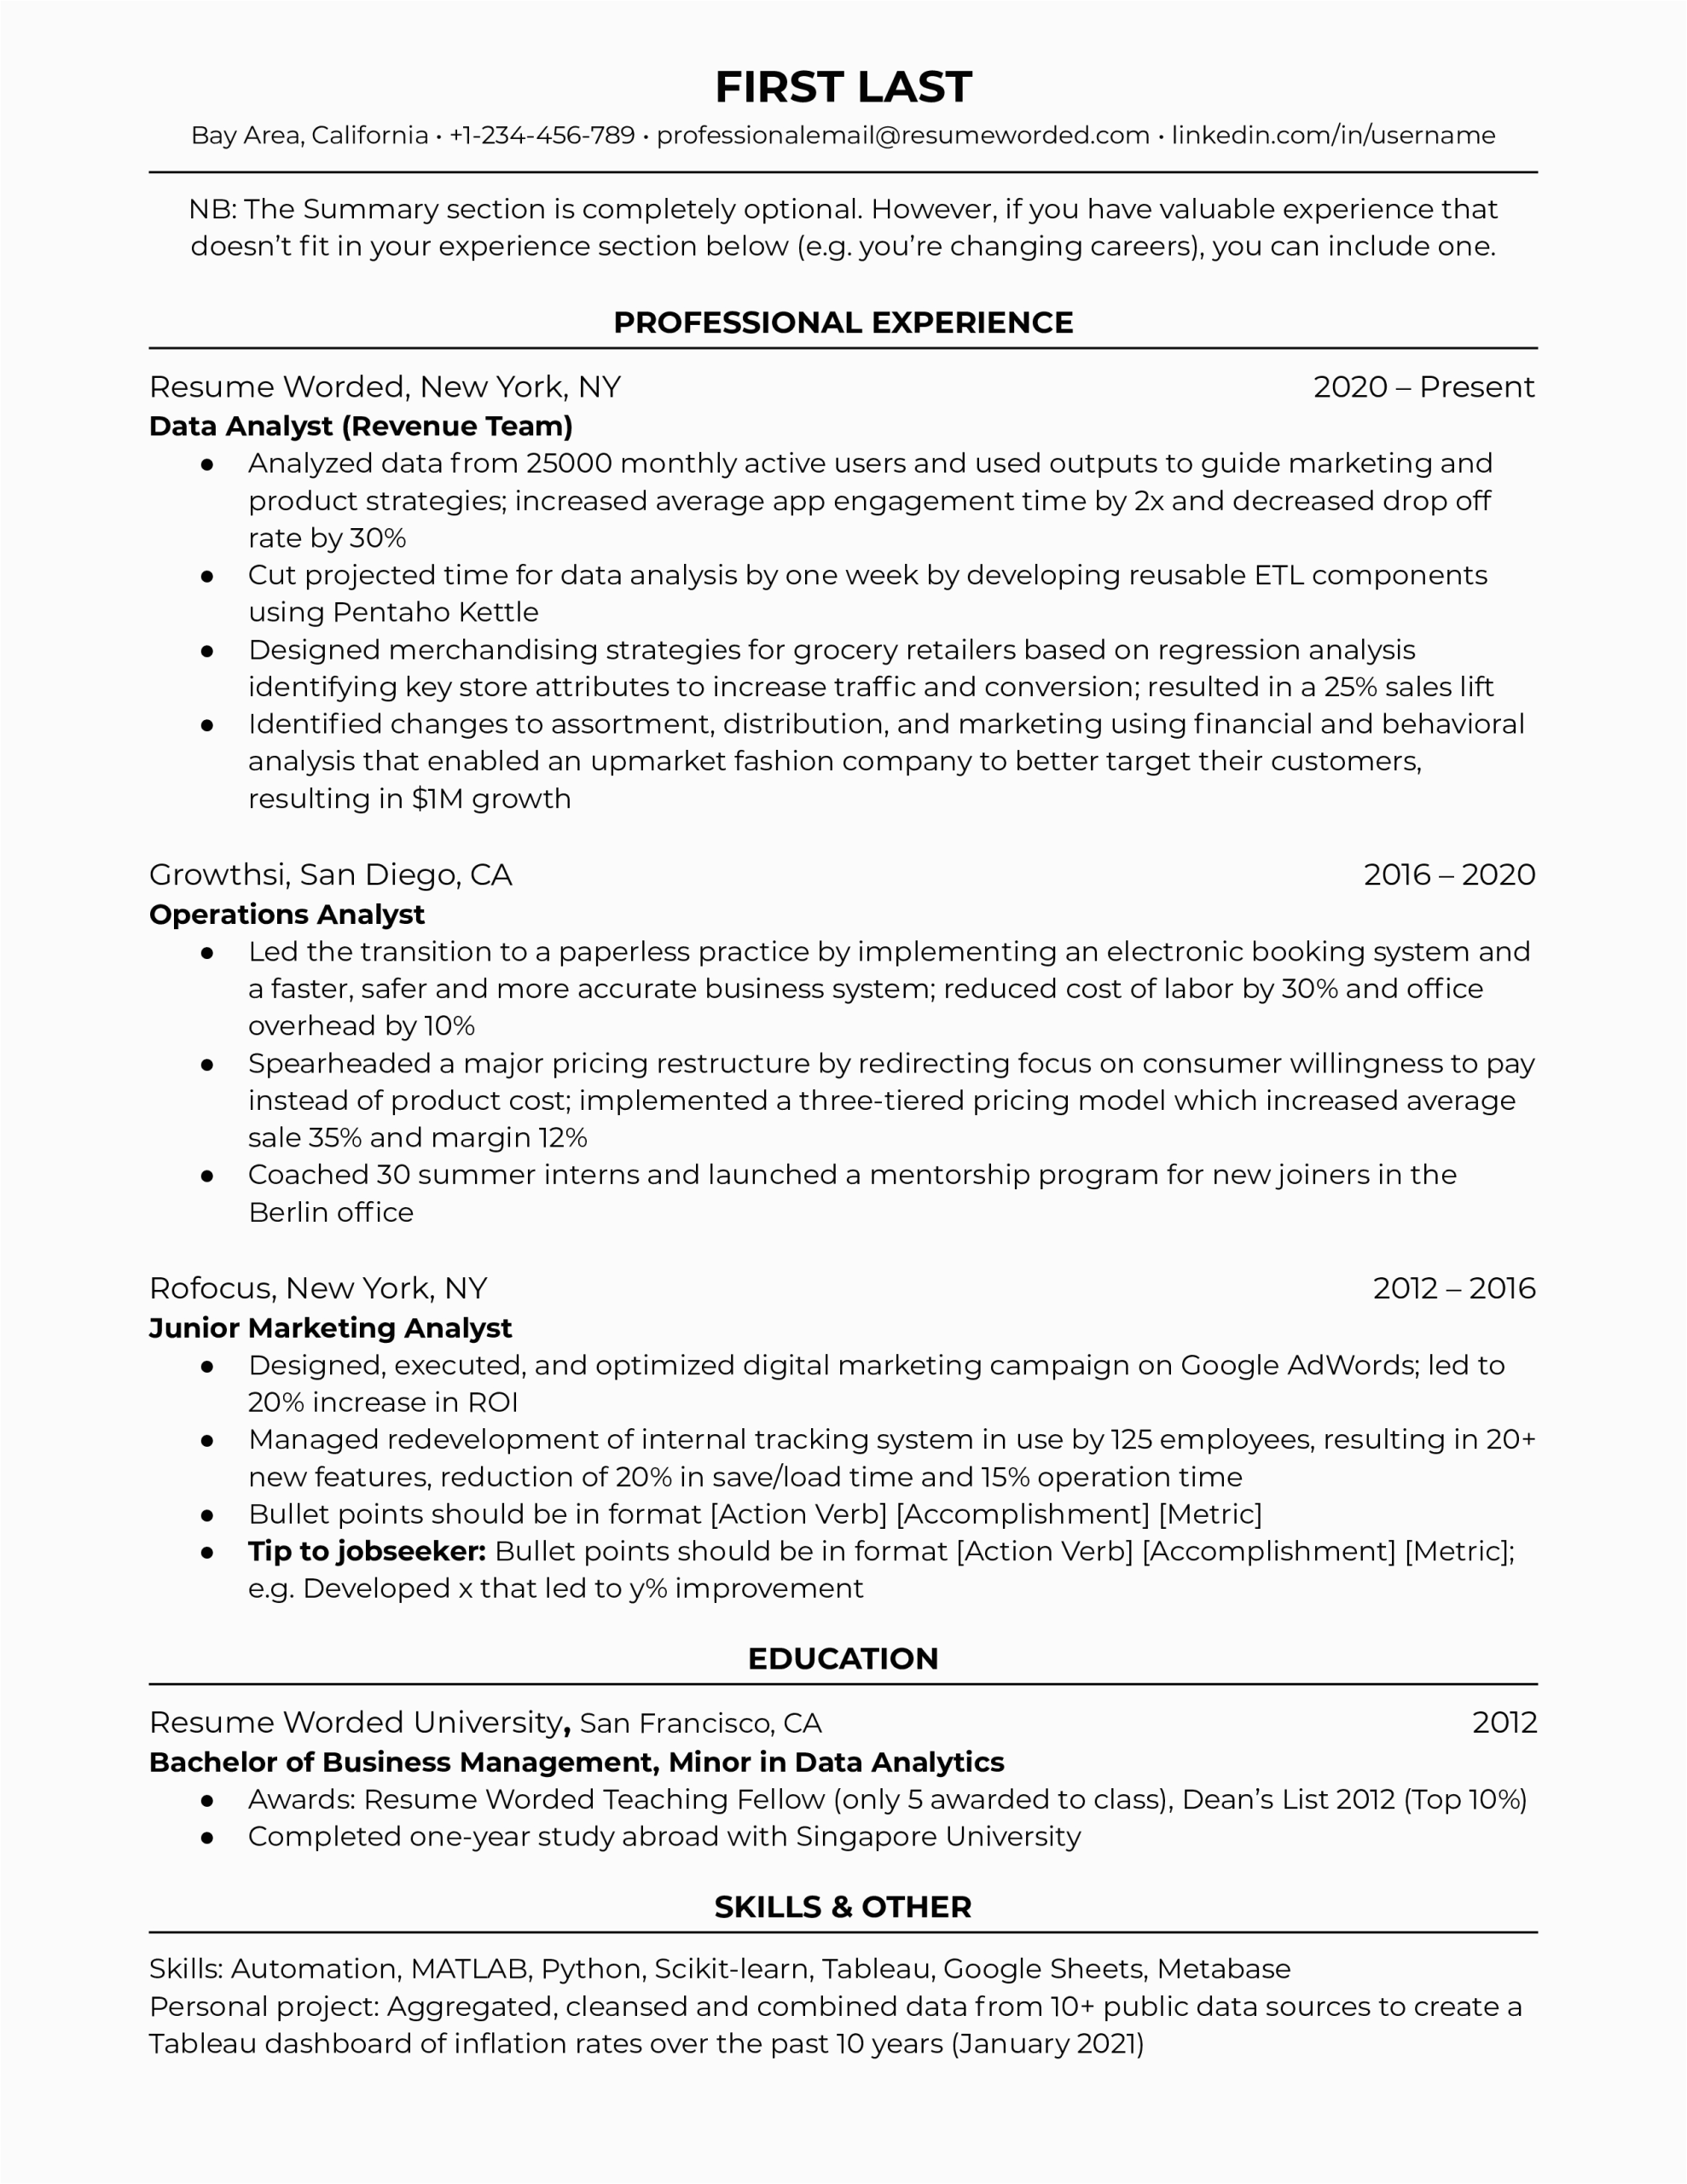 Data Analyst Information for Resume Sample 12 Data Analyst Resume Examples for 2022